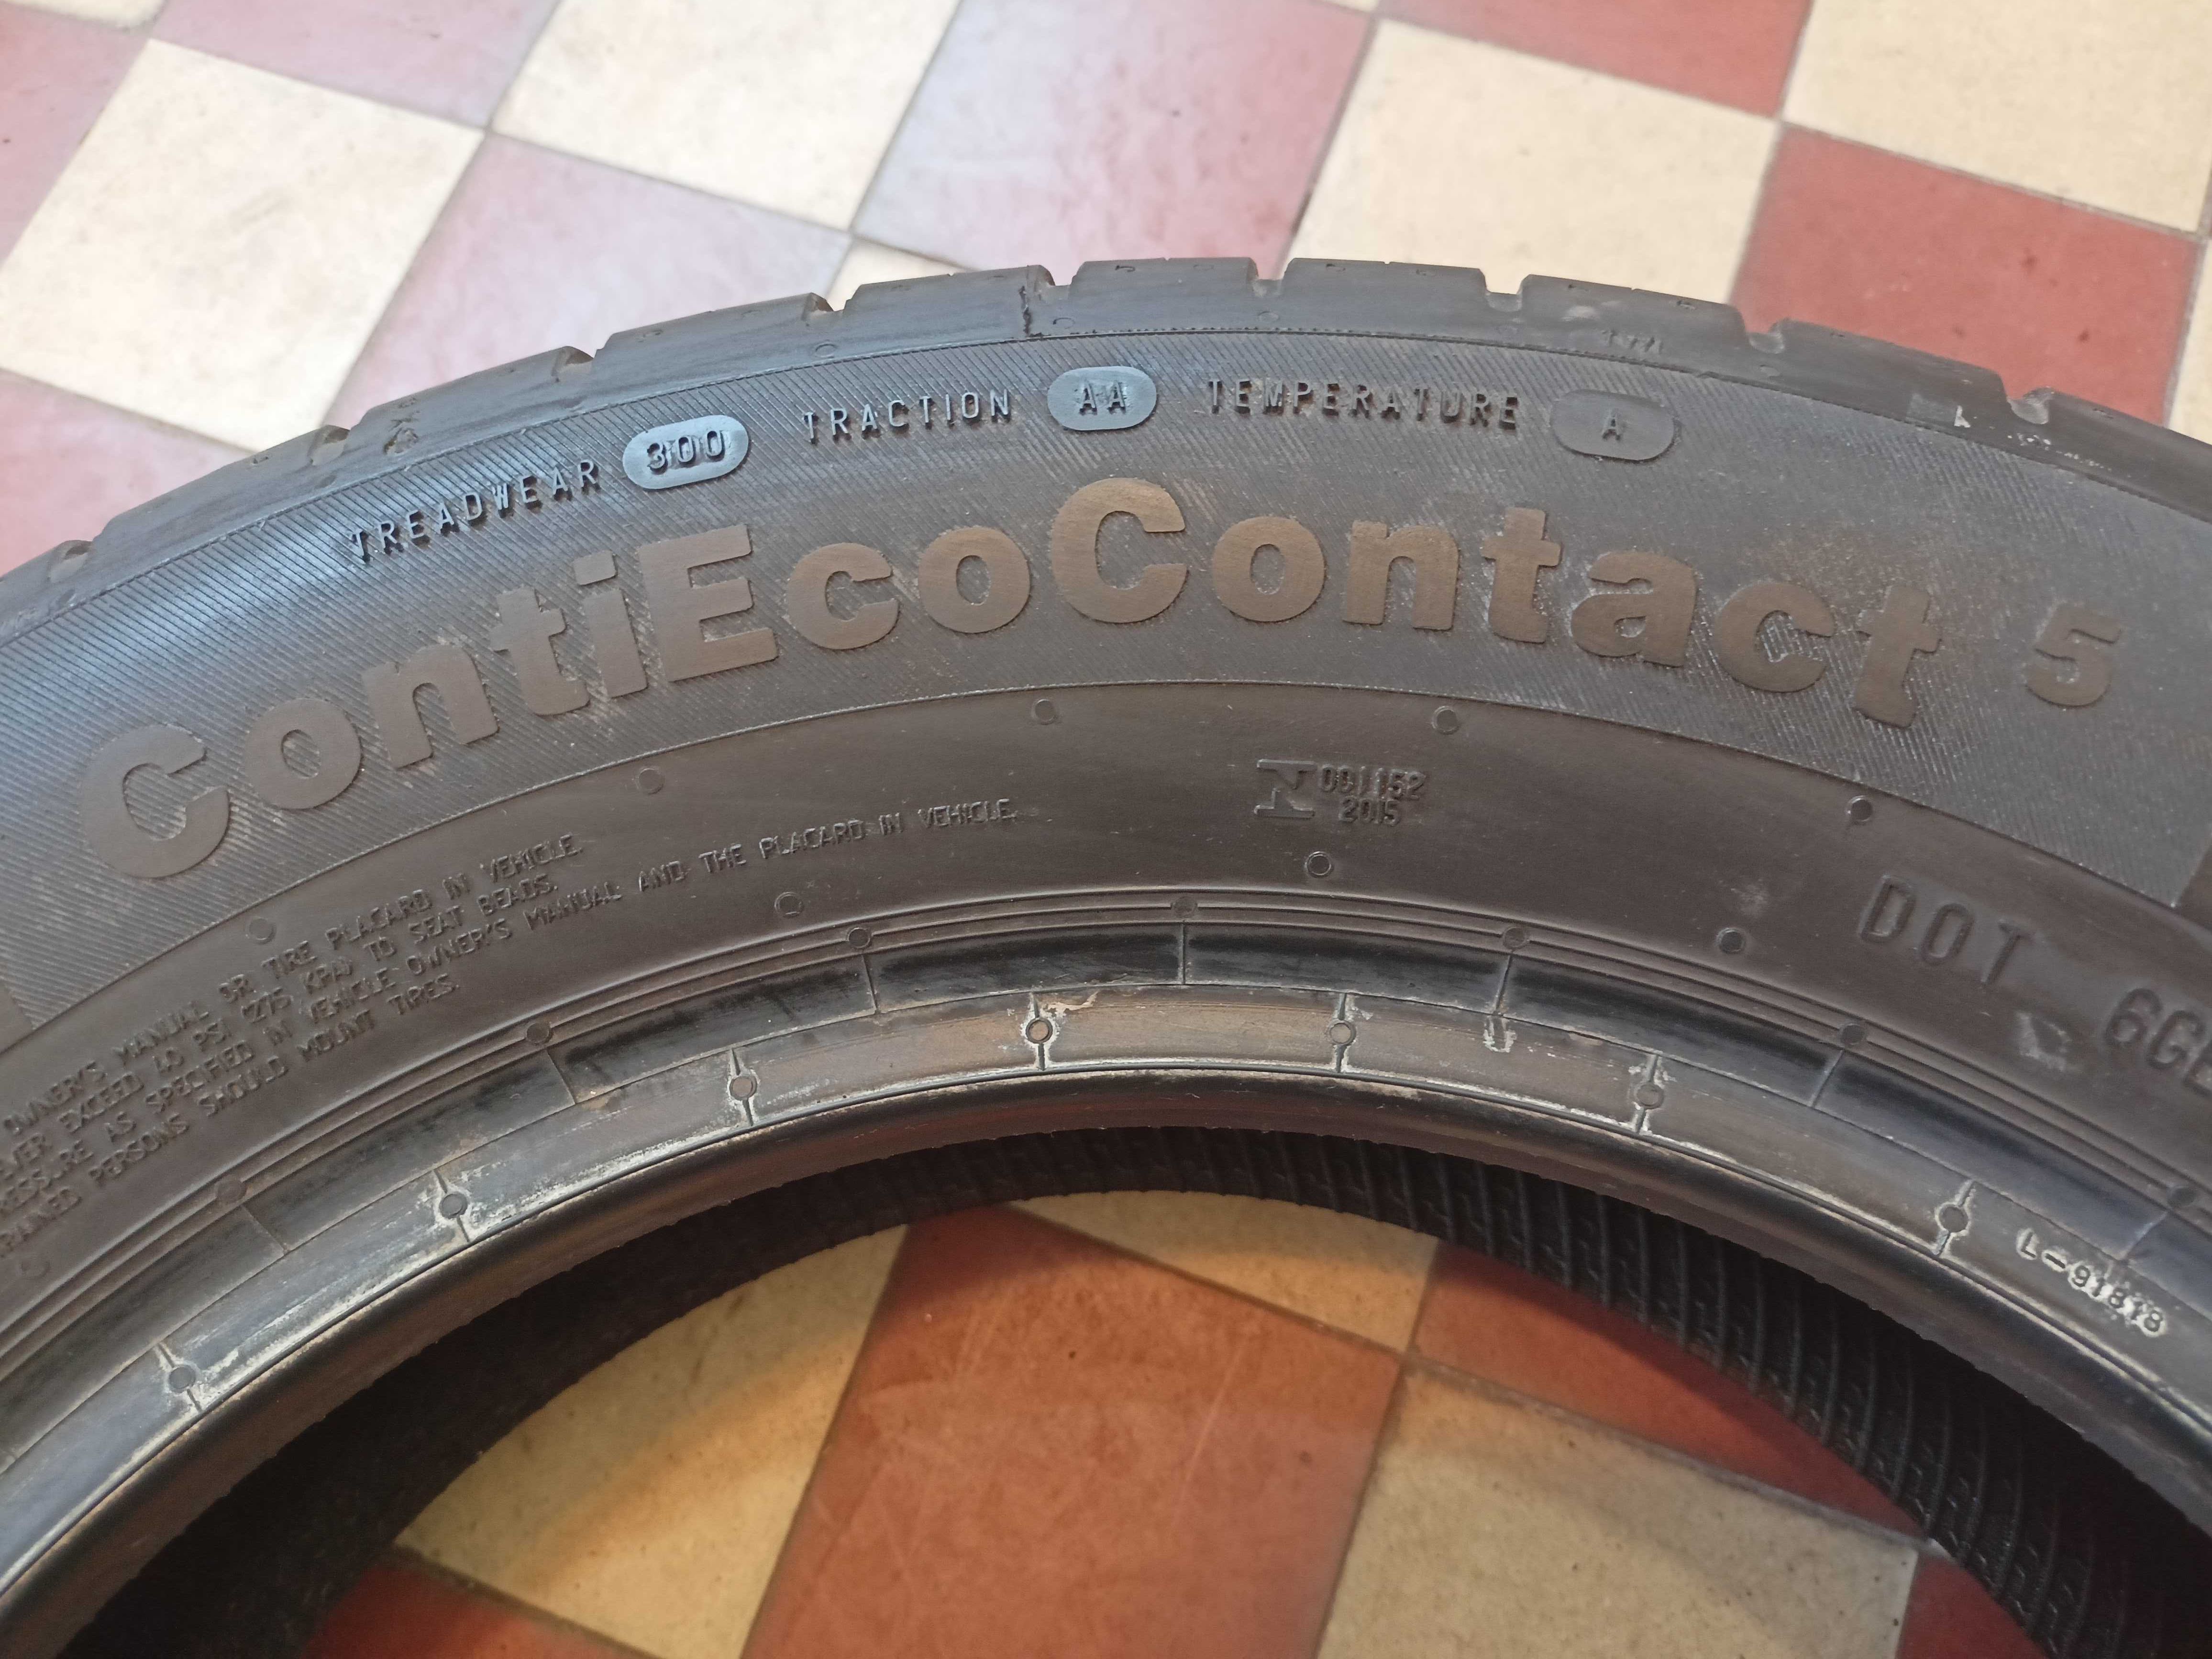 Continental ContiEcoContact 5 175/65R14 82T